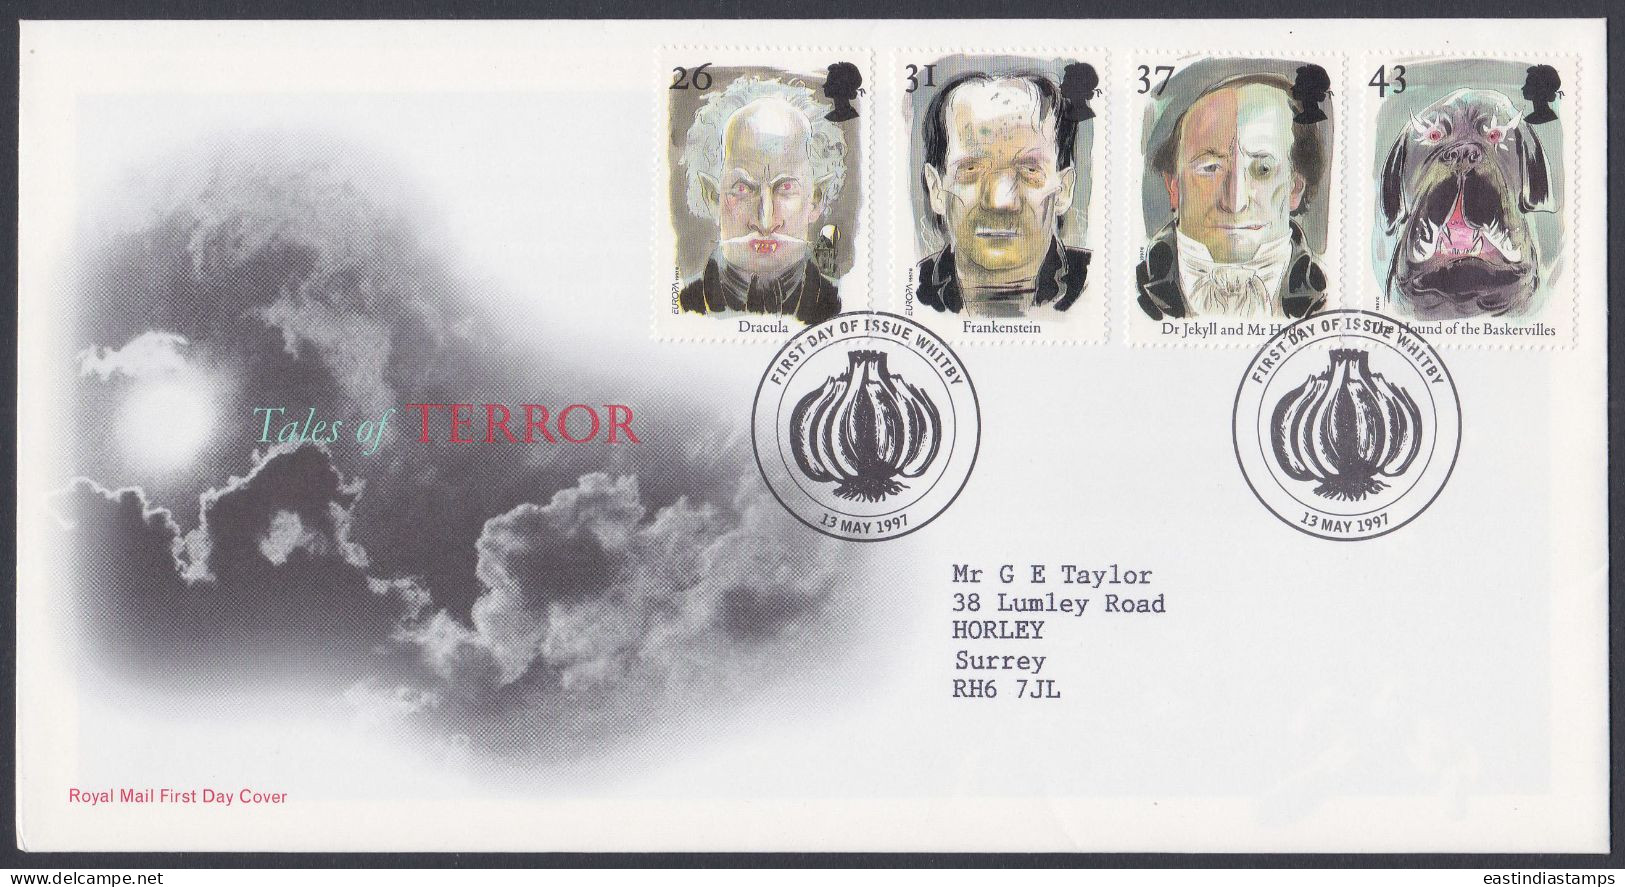 GB Great Britain 1997 FDC Horror Stories, Dracula, Frankenstein, Sherlock Holmes, Pictorial Postmark, First Day Cover - Covers & Documents